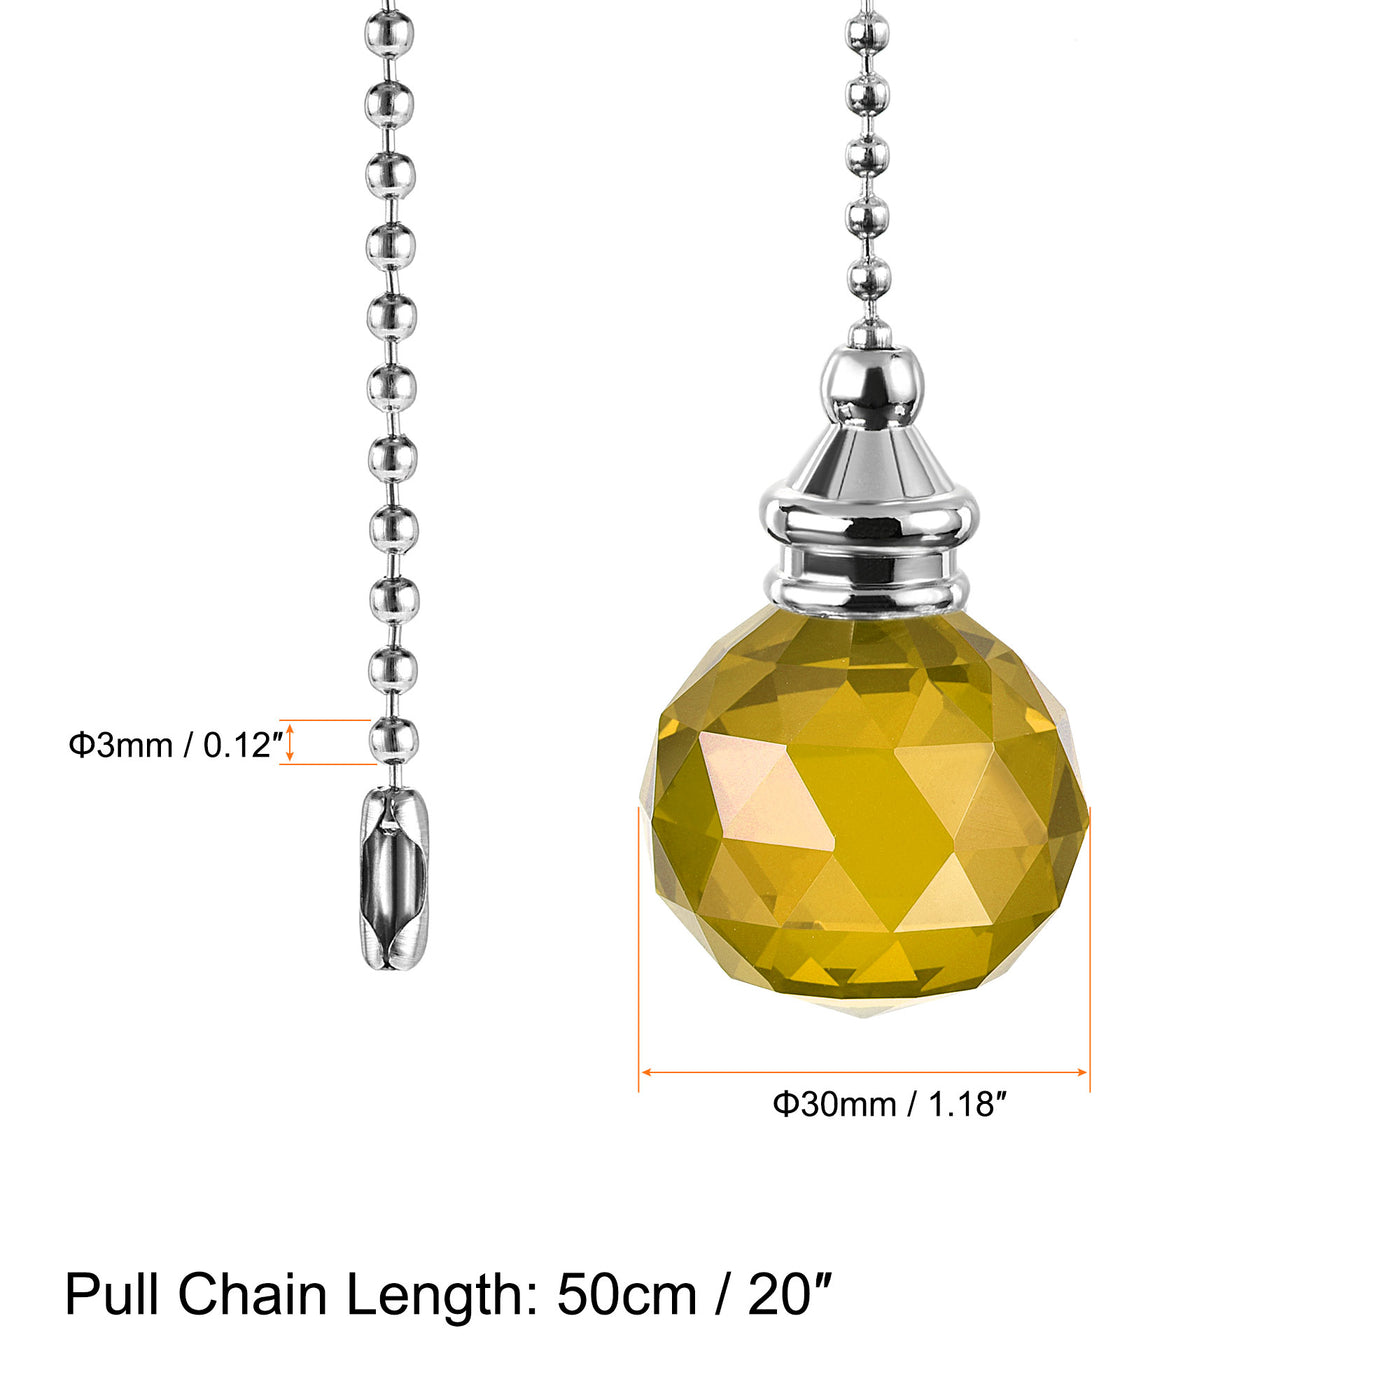 uxcell Uxcell Ceiling Fan Pull Chain, 20 Inch Nickel Finish Chain Ornament Extension, 30mm Gold Tone Crystal Ball Pendant 2Pcs